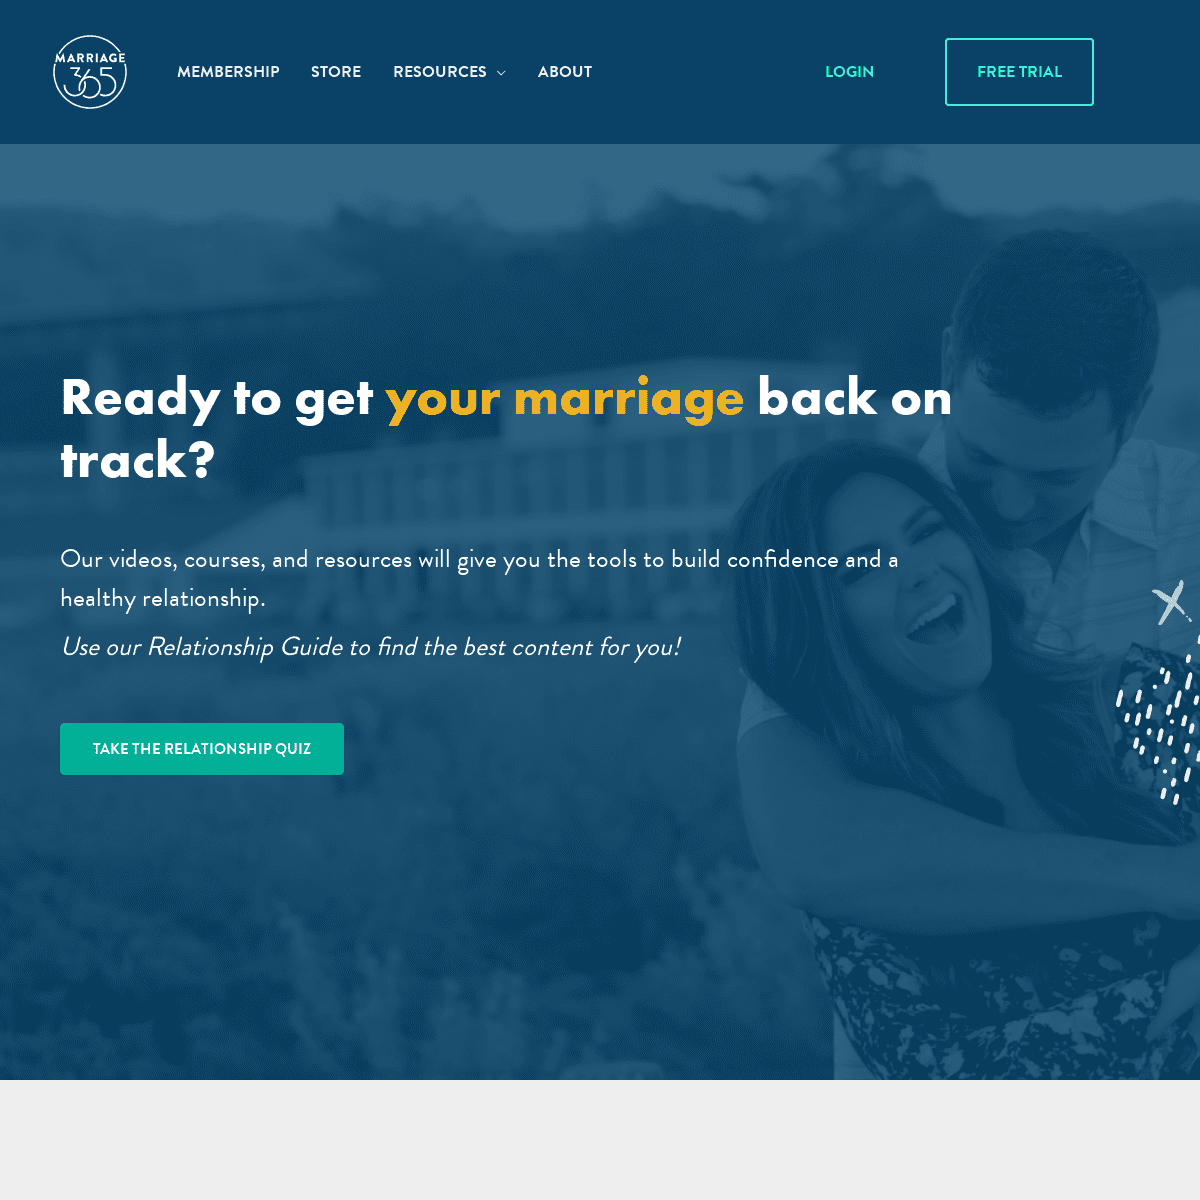 A complete backup of https://marriage365.org